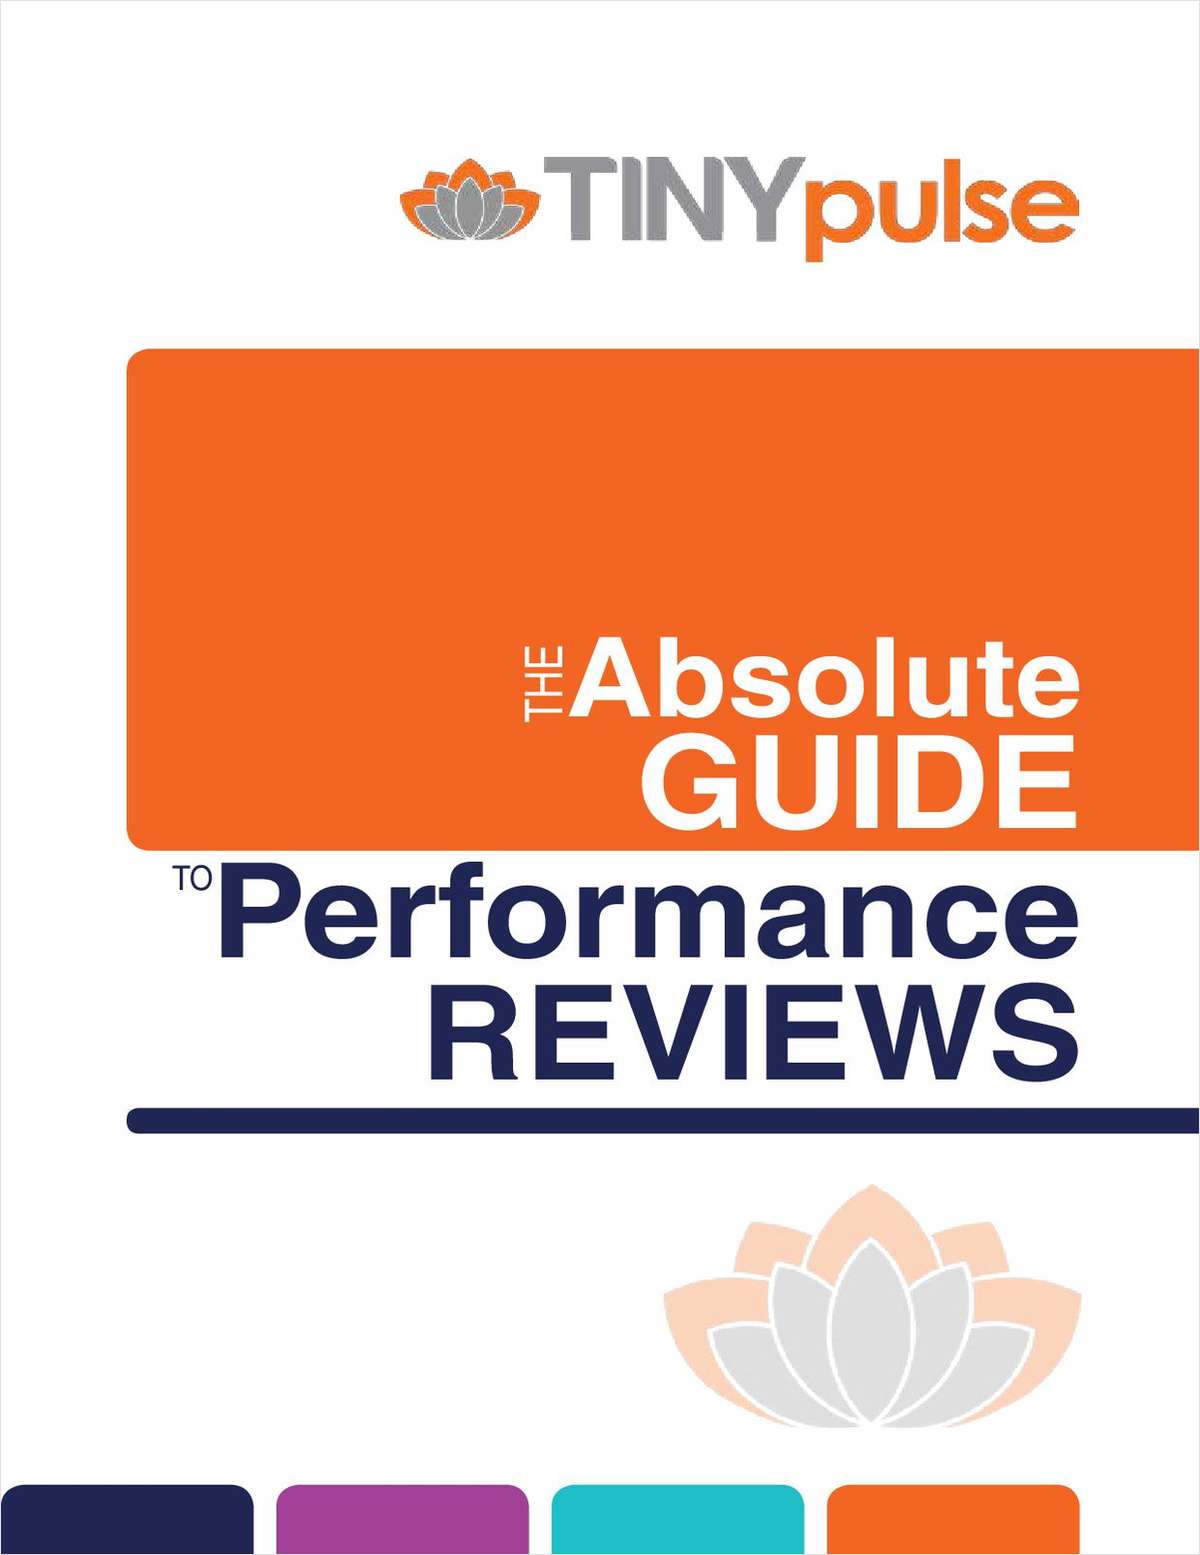 The Absolute Guide to Performance Reviews